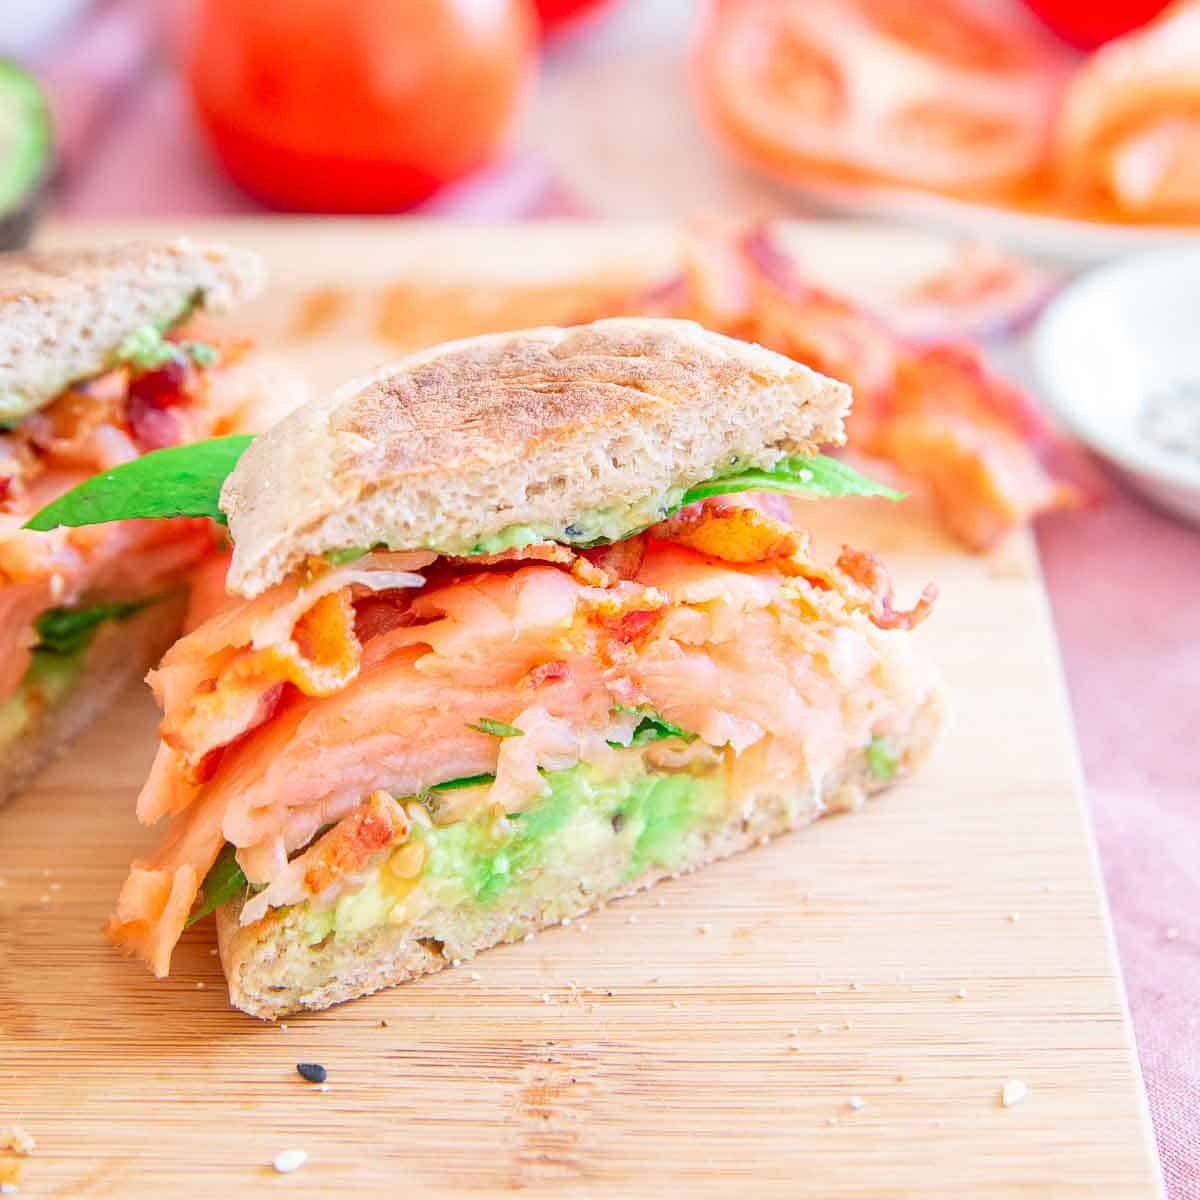 Enjoy this salmon BLT with smashed avocado for breakfast or lunch.